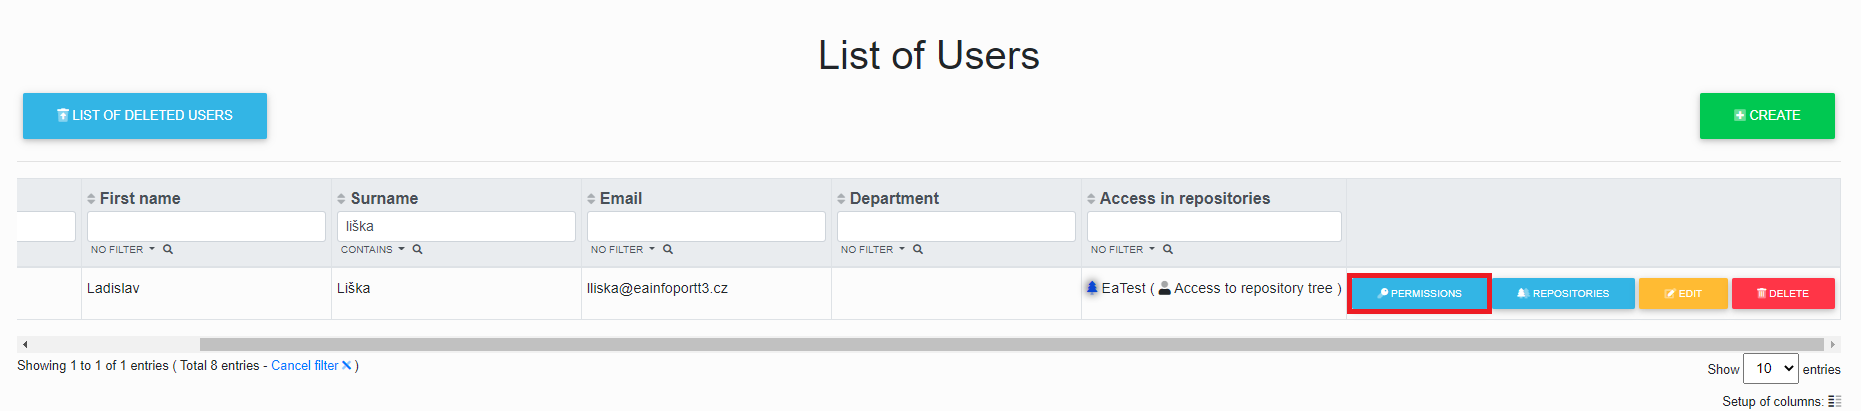 list of user permissions button.png